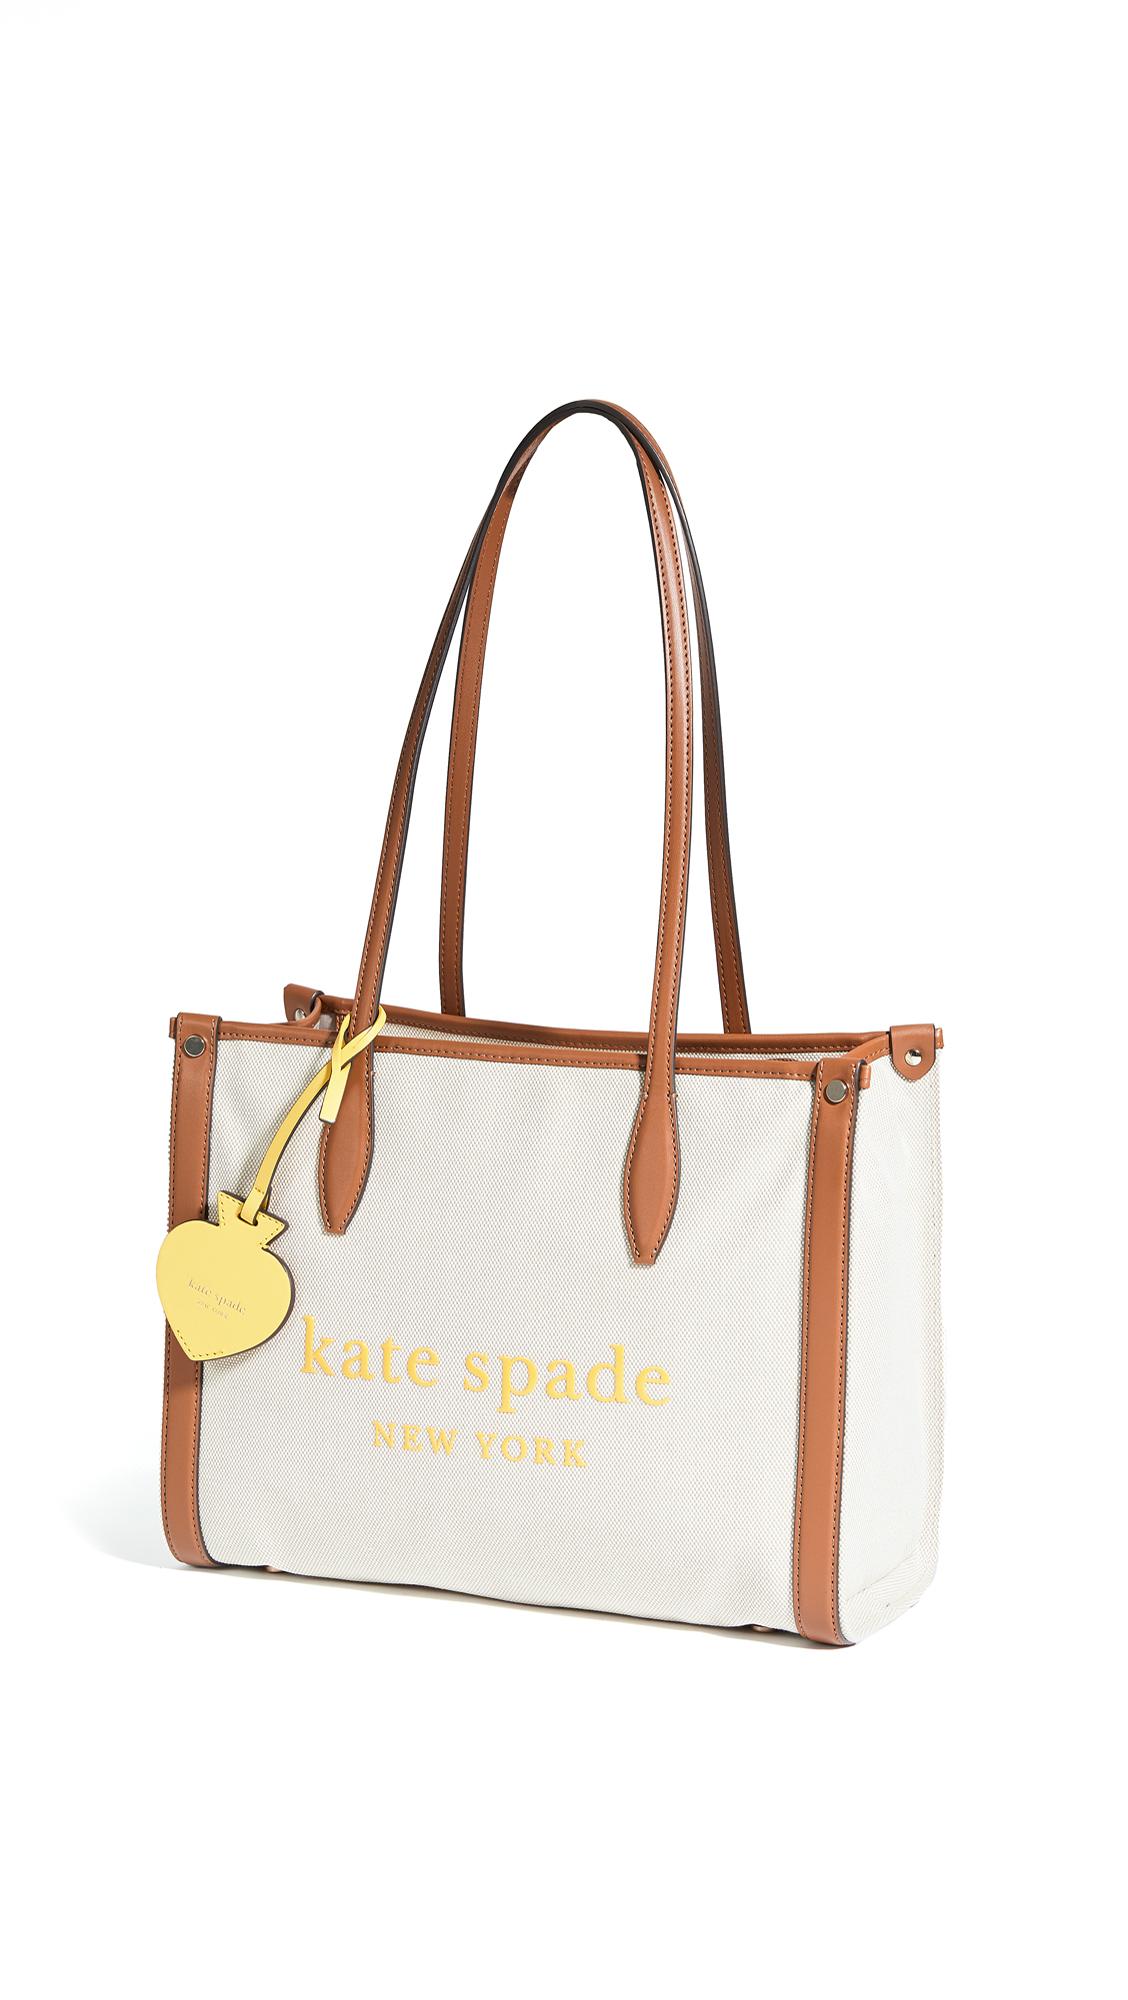 Total 97+ imagen tote kate spade - Abzlocal.mx